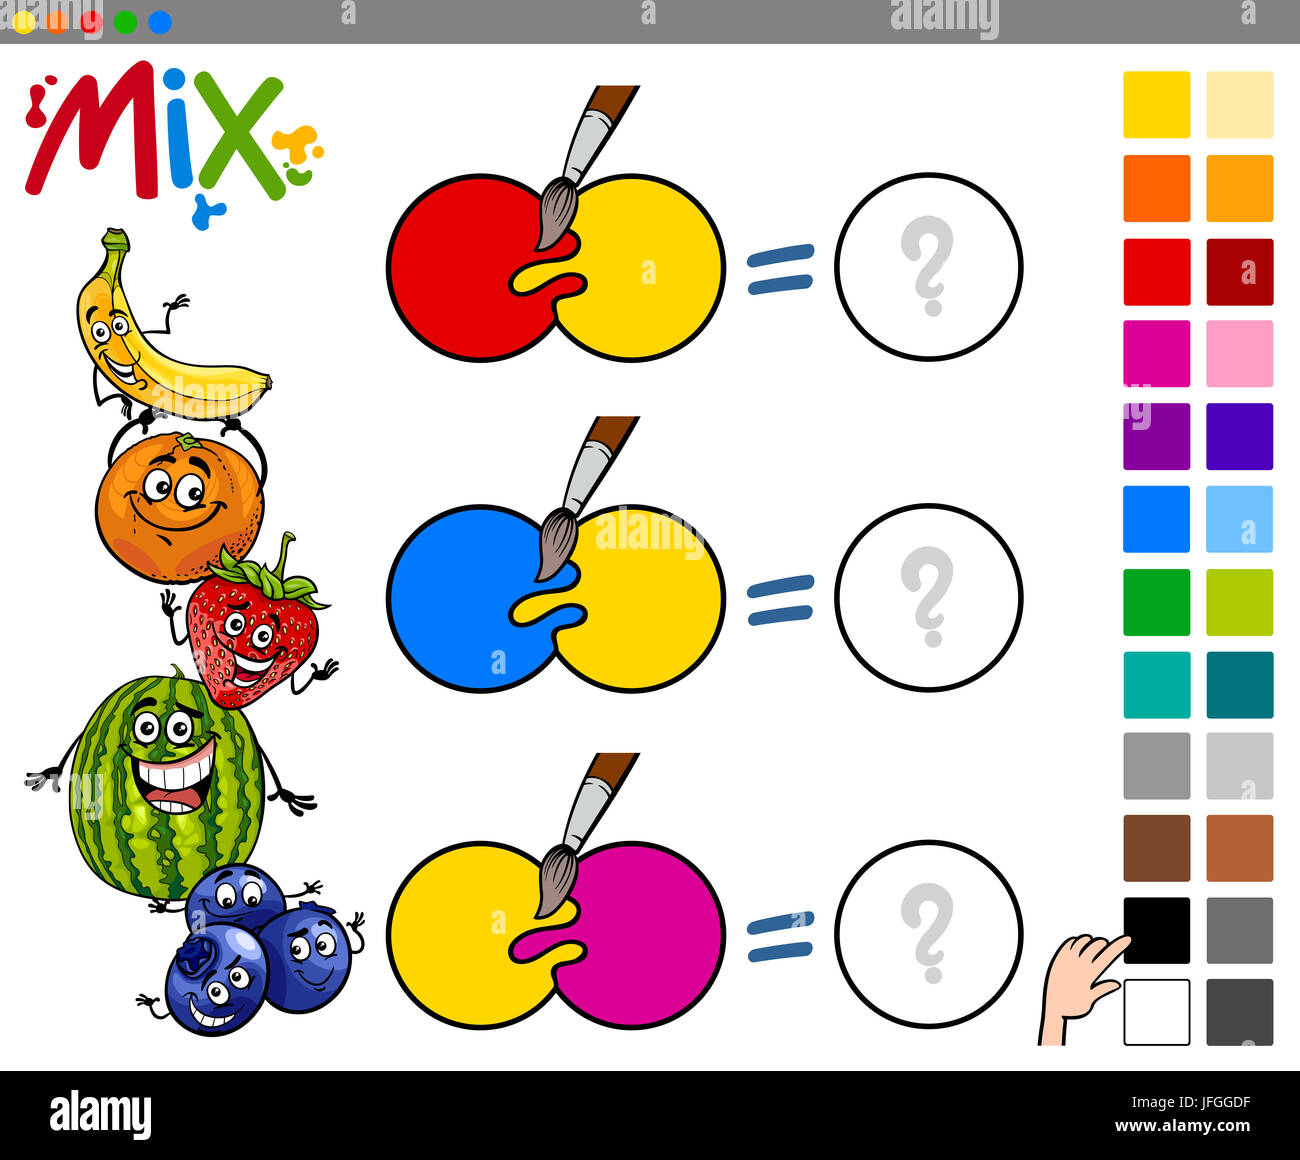 mix colors educational game Stock Photo - Alamy